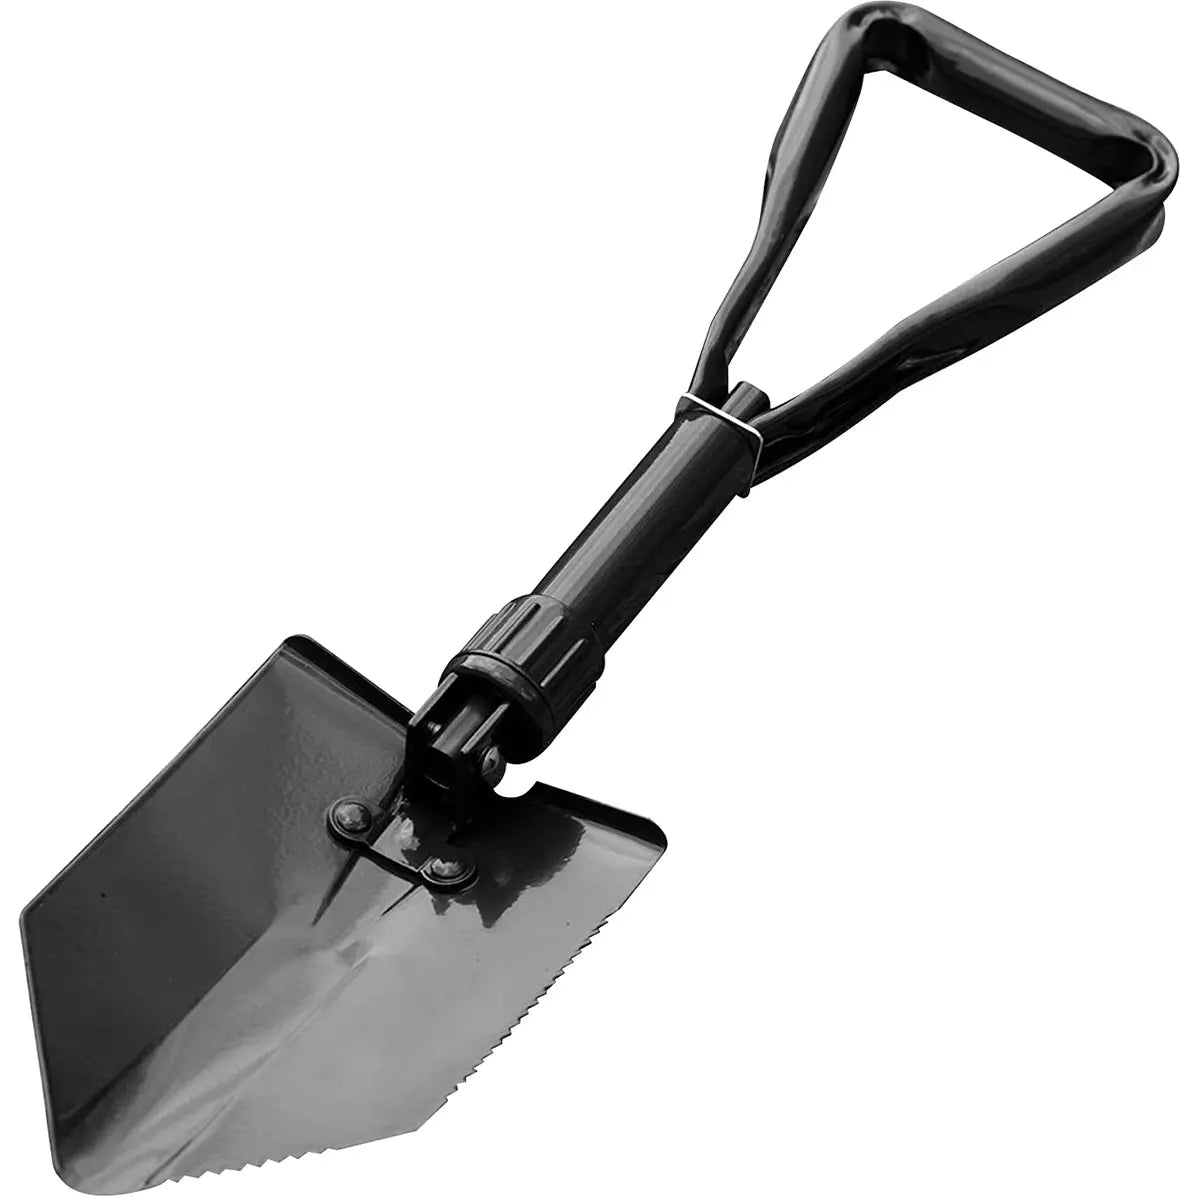 Coghlan's Folding Shovel, Tempered Forged Steel Blade for Digging, Camping Tool Coghlan's